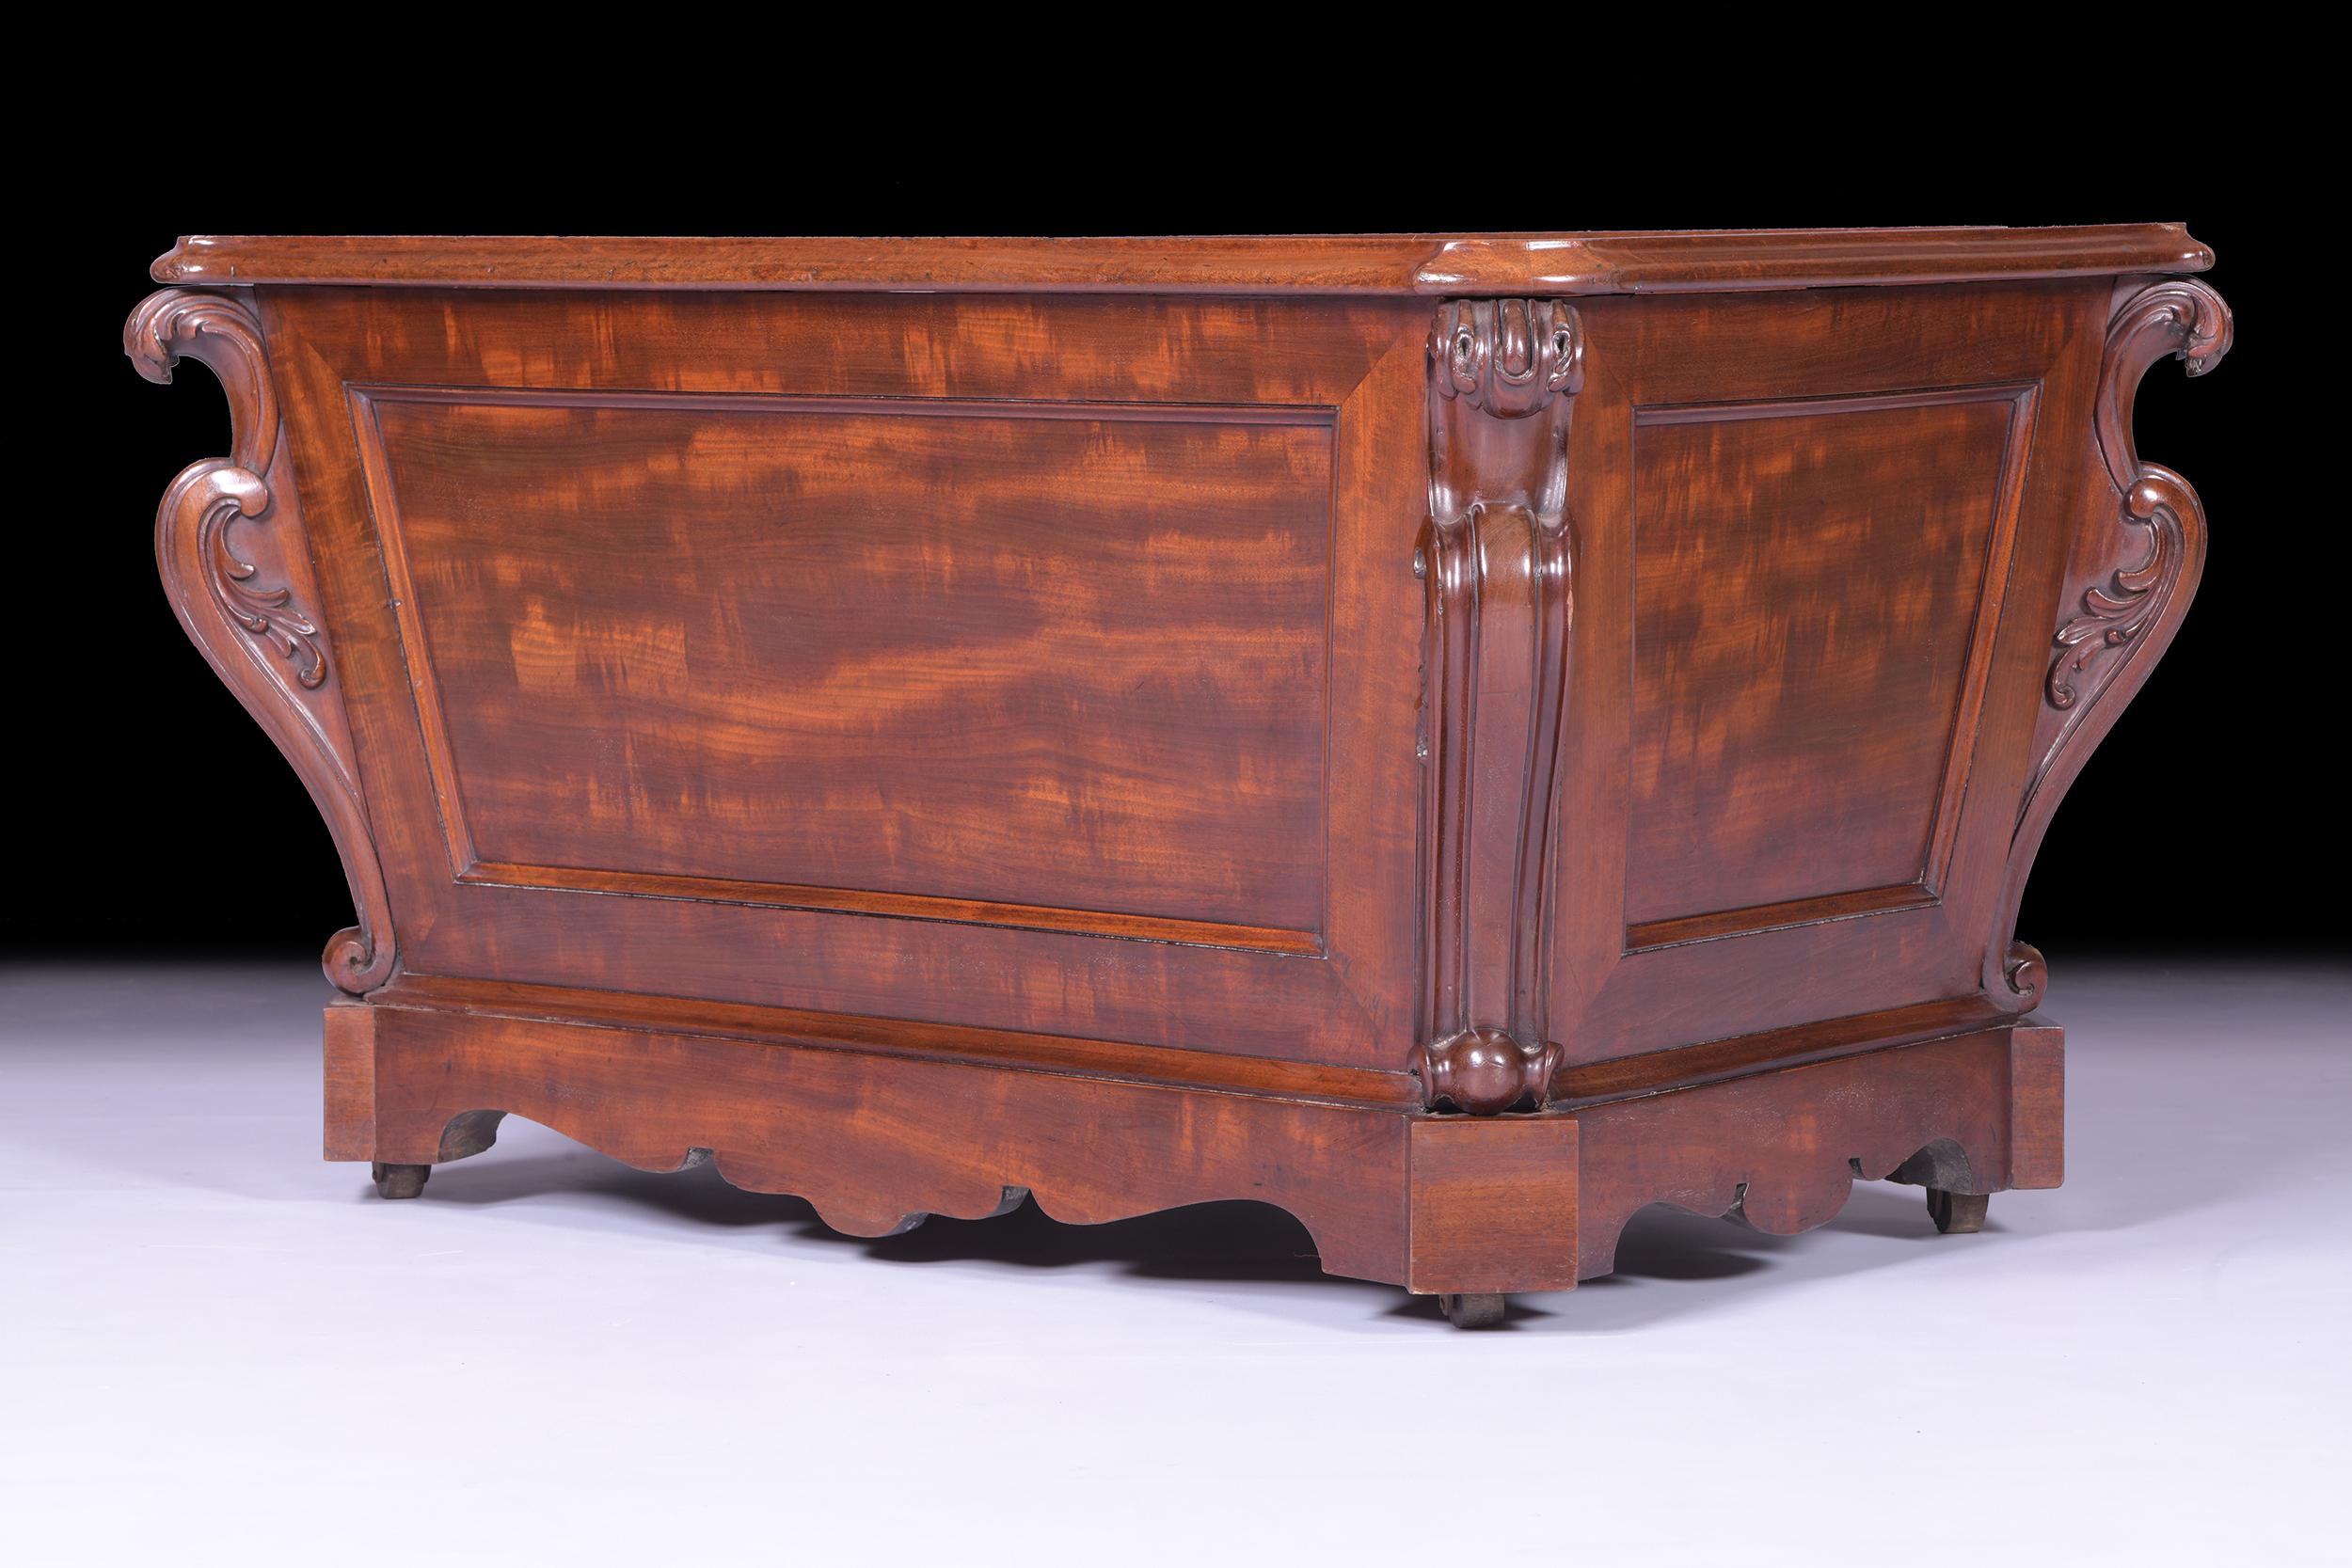 A fine early 19th Century English Regency mahogany open cellarette attributed to Gillows of Lancaster, of open sarcophagus form with an overhung and carved top edge over panelled sides, with carved scrolling corners raised on Cope's patent brass